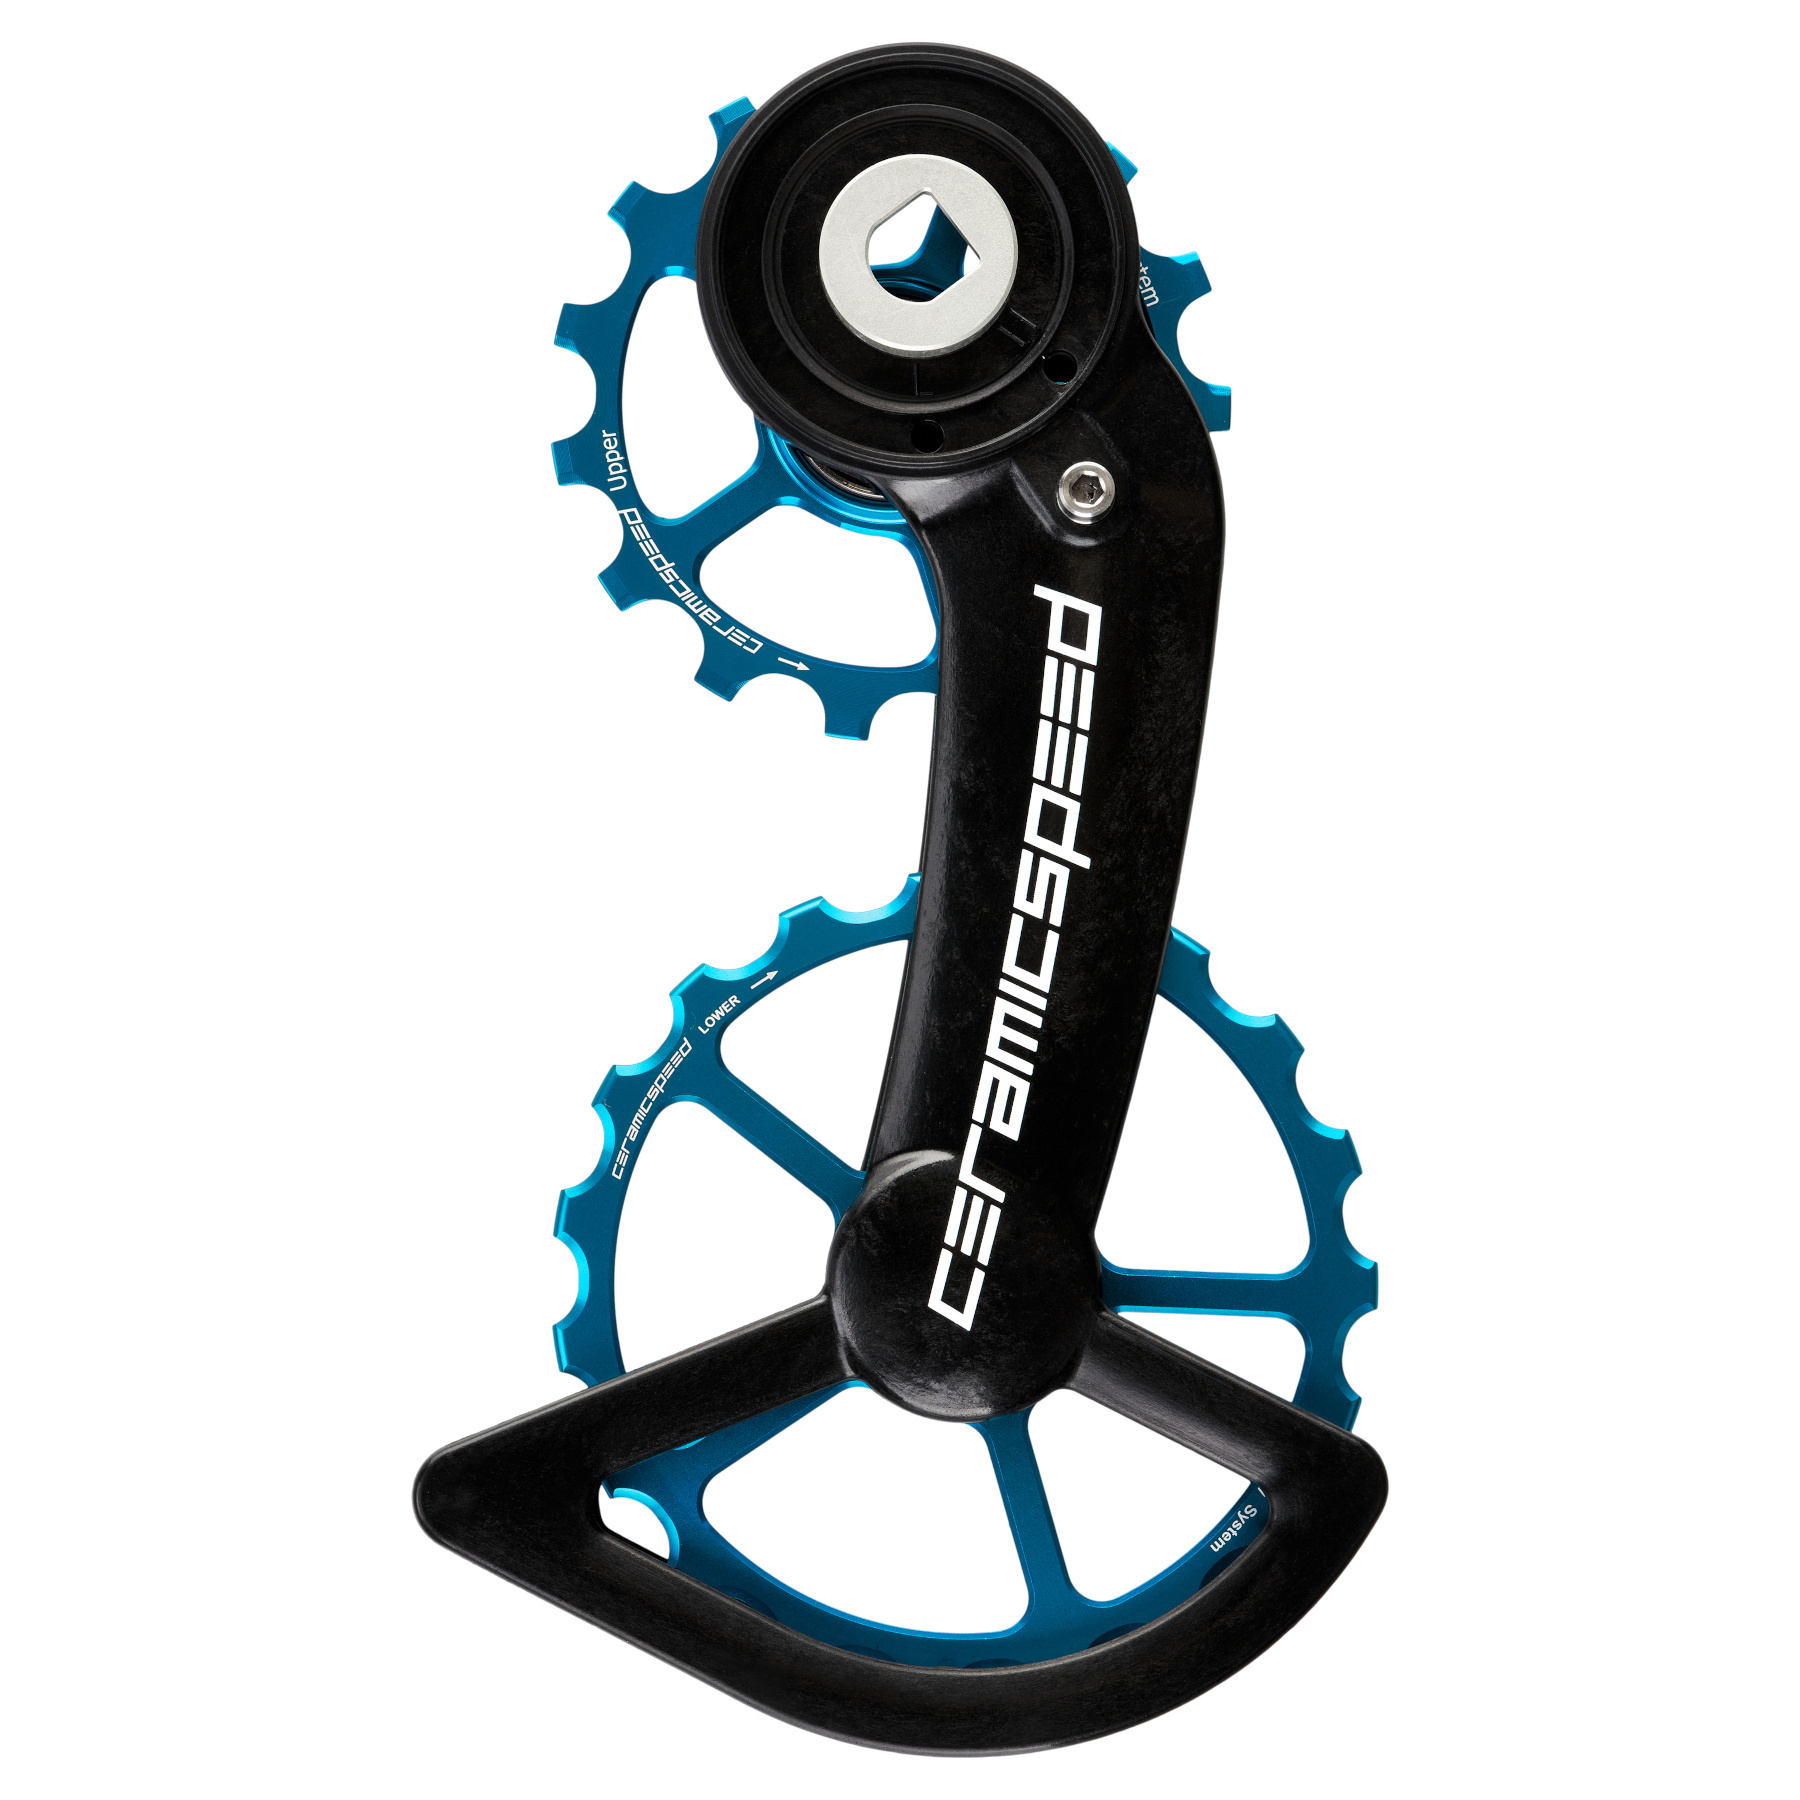 Image of CeramicSpeed OSPW Derailleur Pulley System - for SRAM Red/Force AXS | 15/19 Teeth | Coated Bearings - Alternative Blue